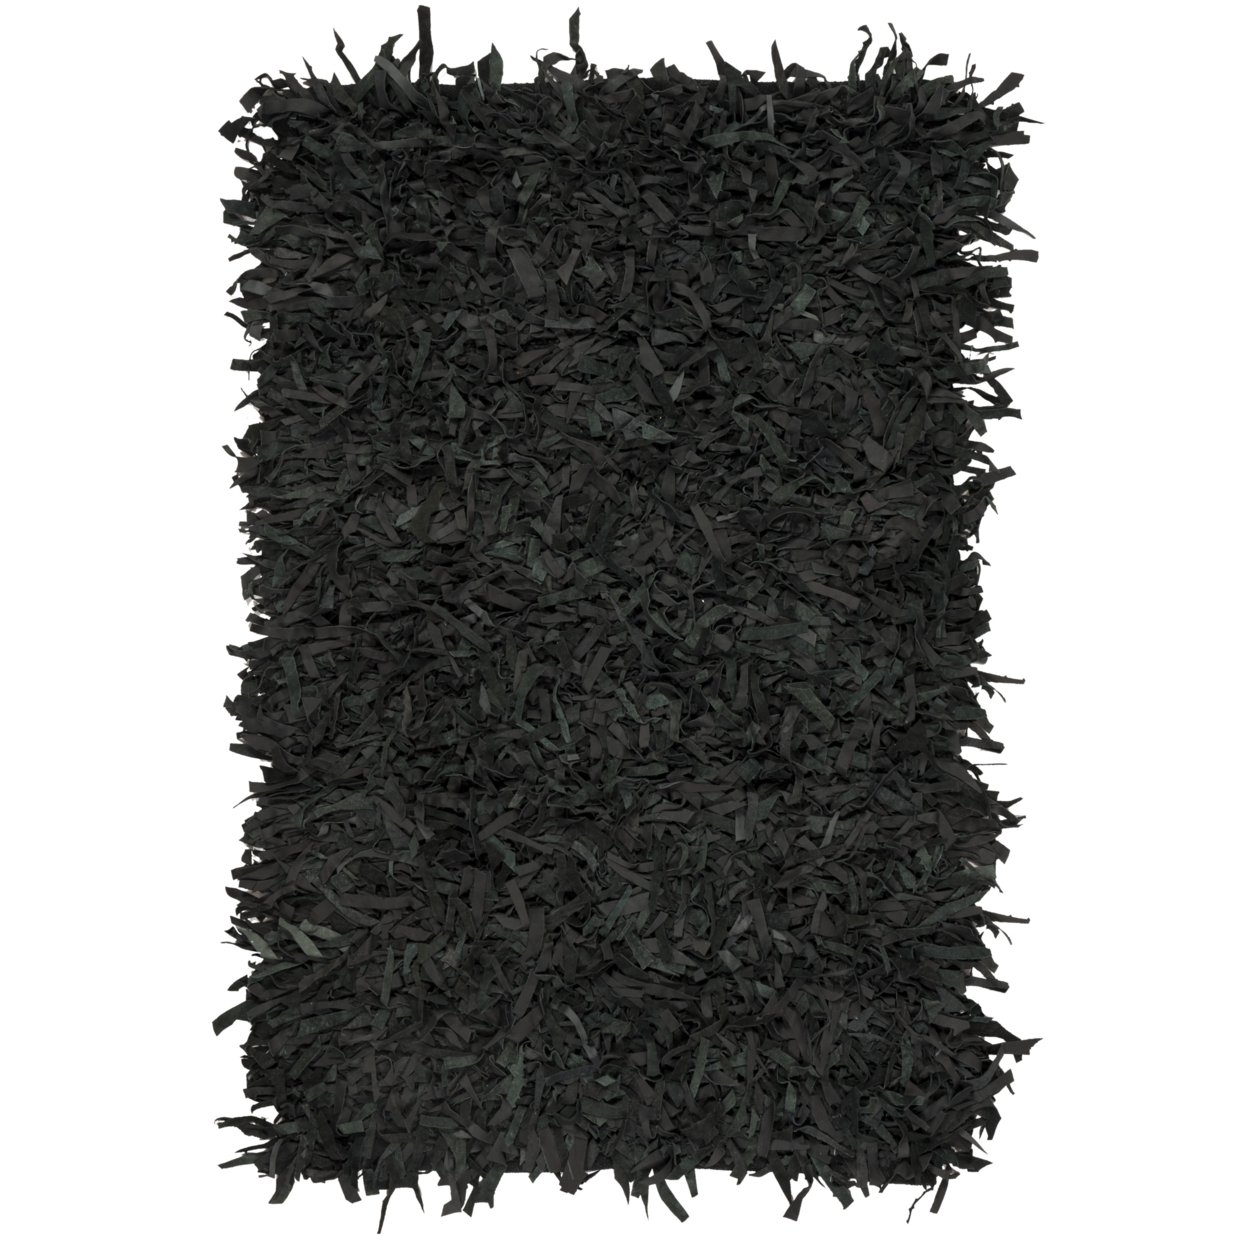 SAFAVIEH Leather Shag LSG601A Hand-knotted Black Rug - 4' X 6'